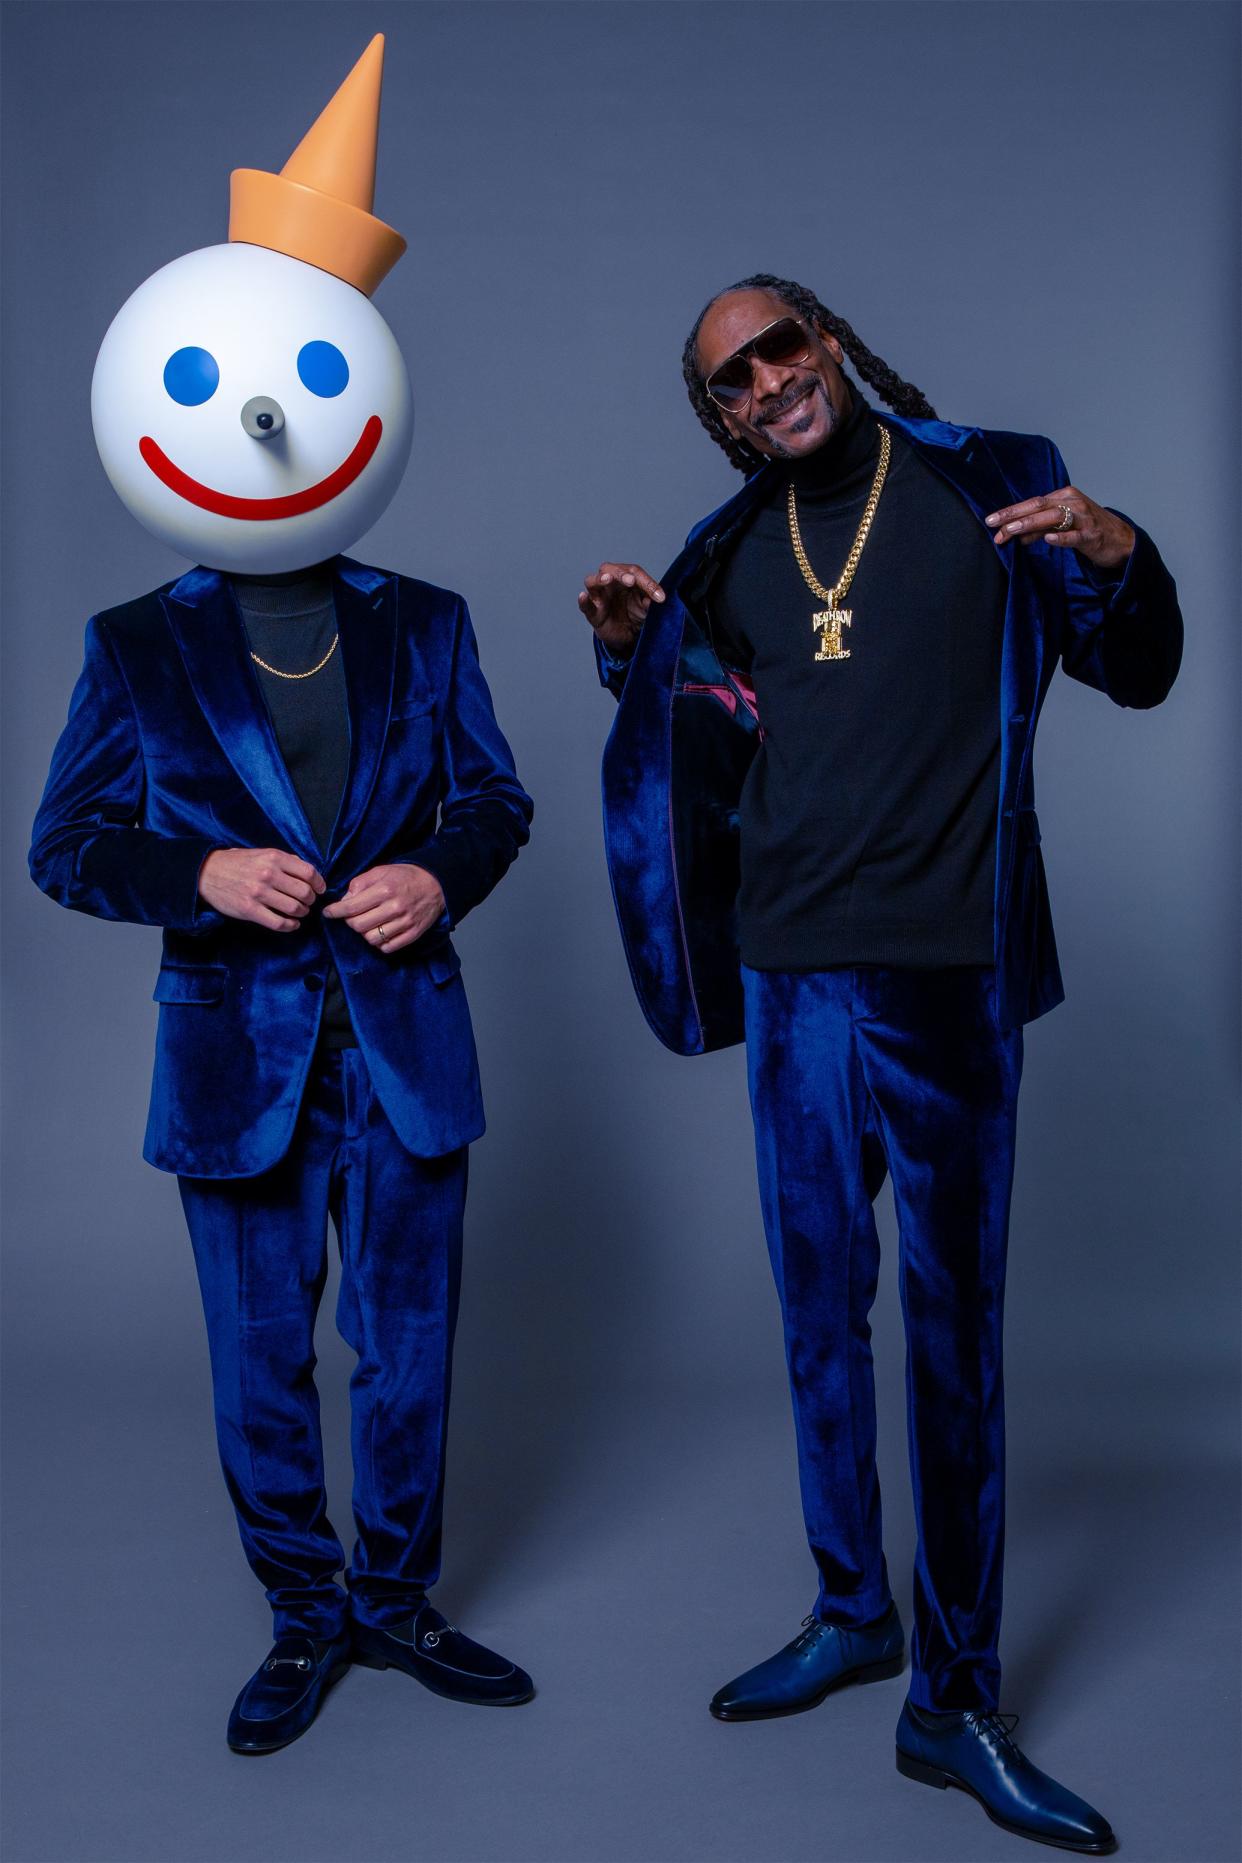 Snoop Dogg and the Jack in the Box mascot